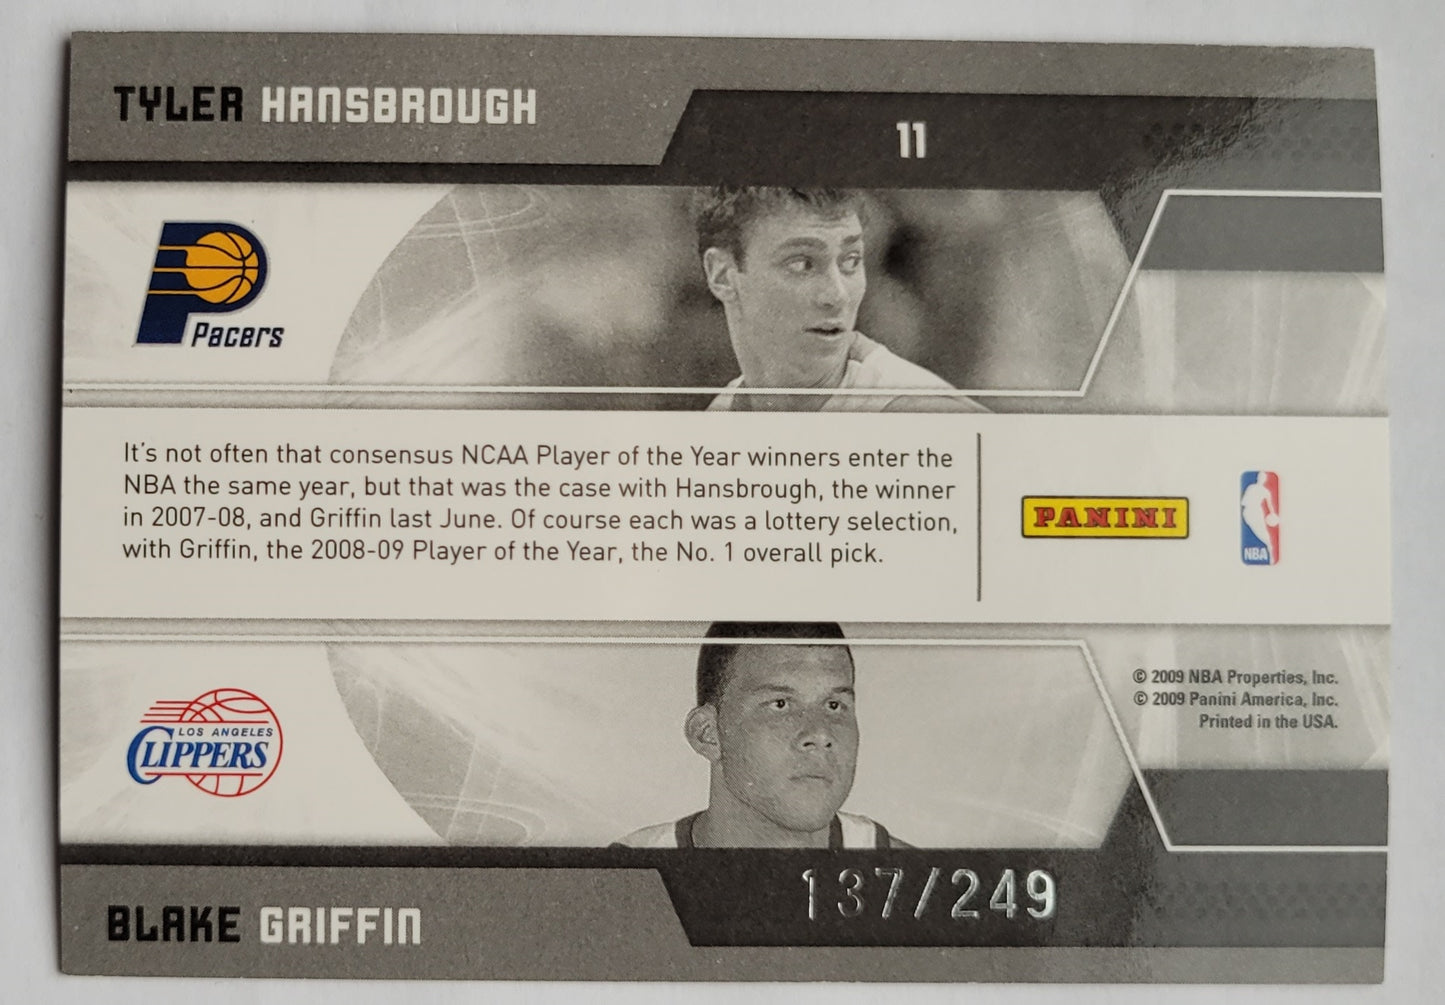 Tyler Hansbrough / Blake Griffin - 2009-10 Donruss Elite Passing the Torch Red #11 - 137/249